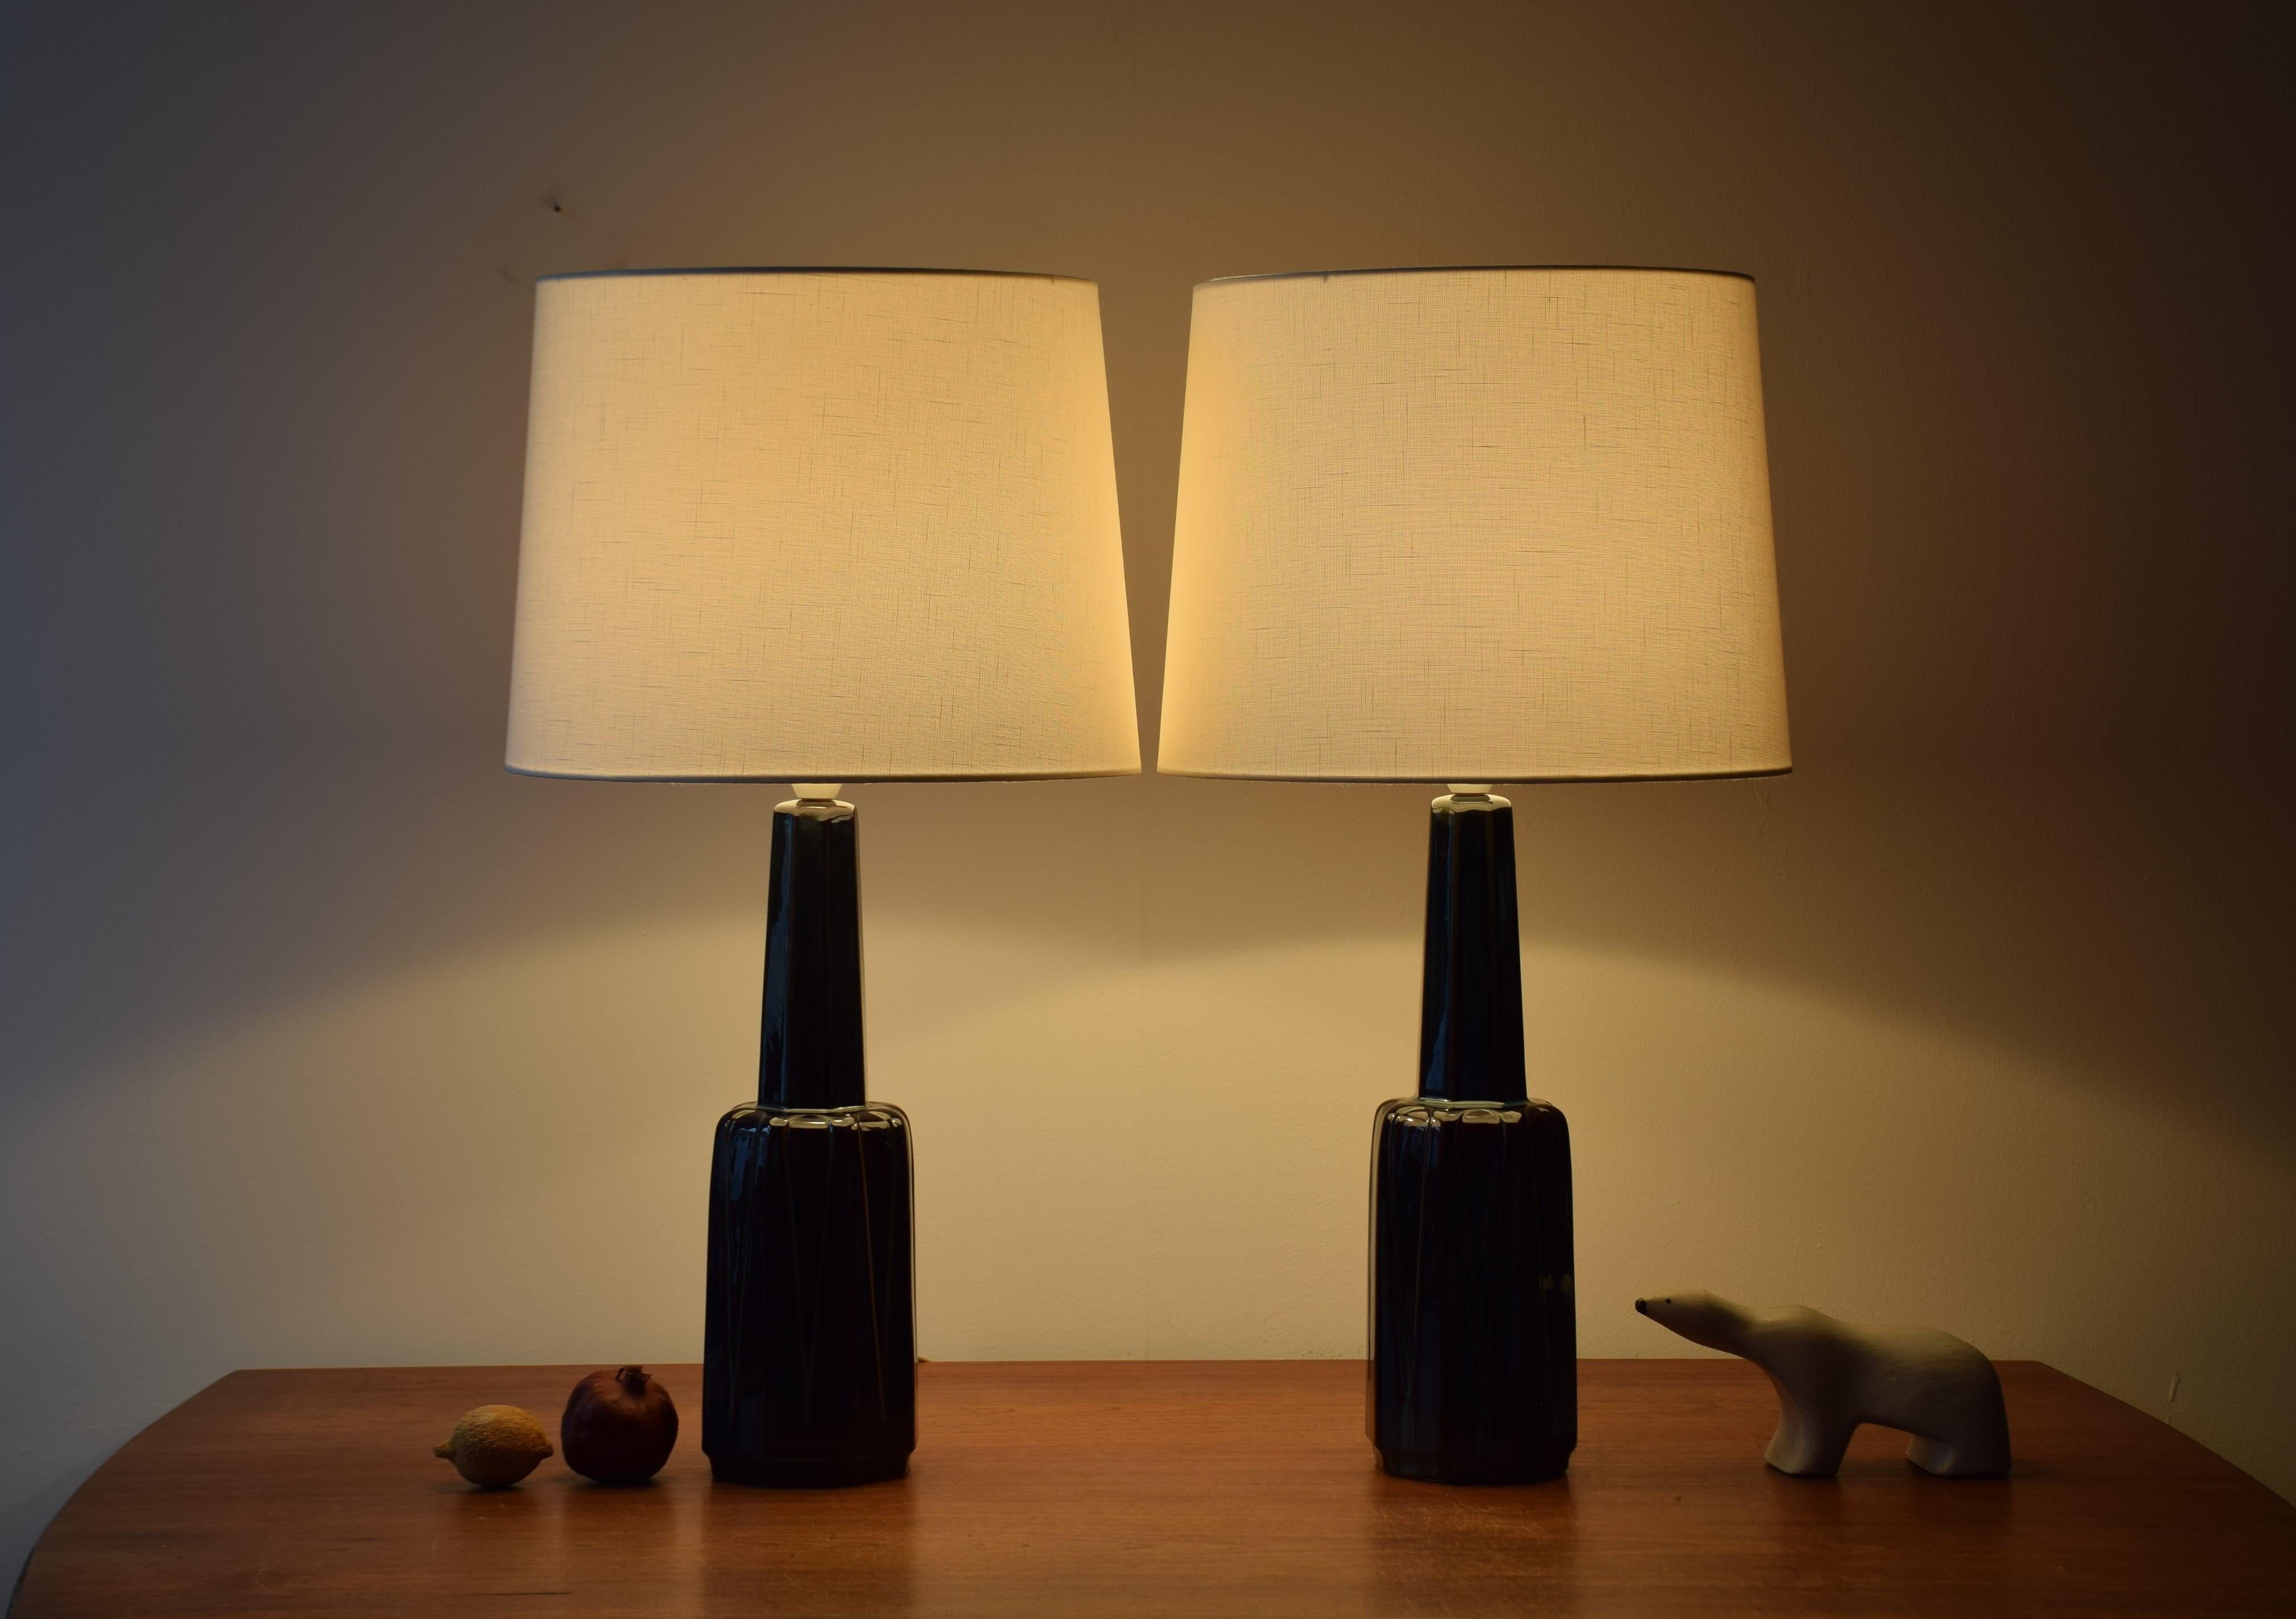 Pair of tall midcentury stylish Danish table lamps from the acknowledged stoneware manufacturer Søholm. Manufactured, circa 1960s. The designer is unknown but it could be by Einar Johansen.

The lamps have a dark blue glaze with elements of brown